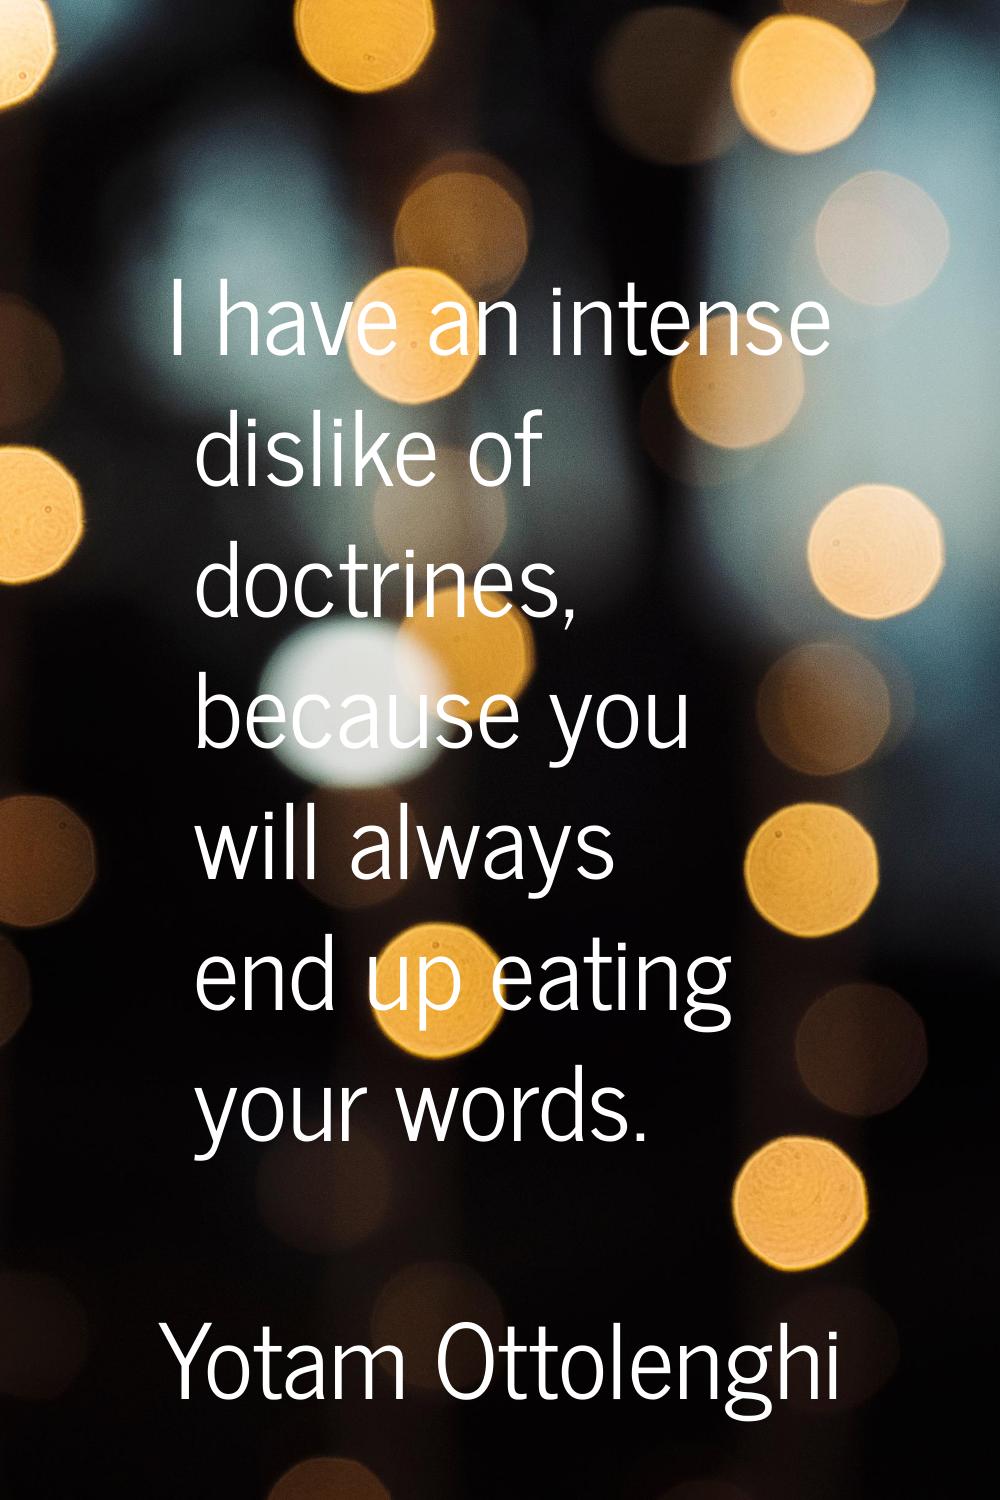 I have an intense dislike of doctrines, because you will always end up eating your words.